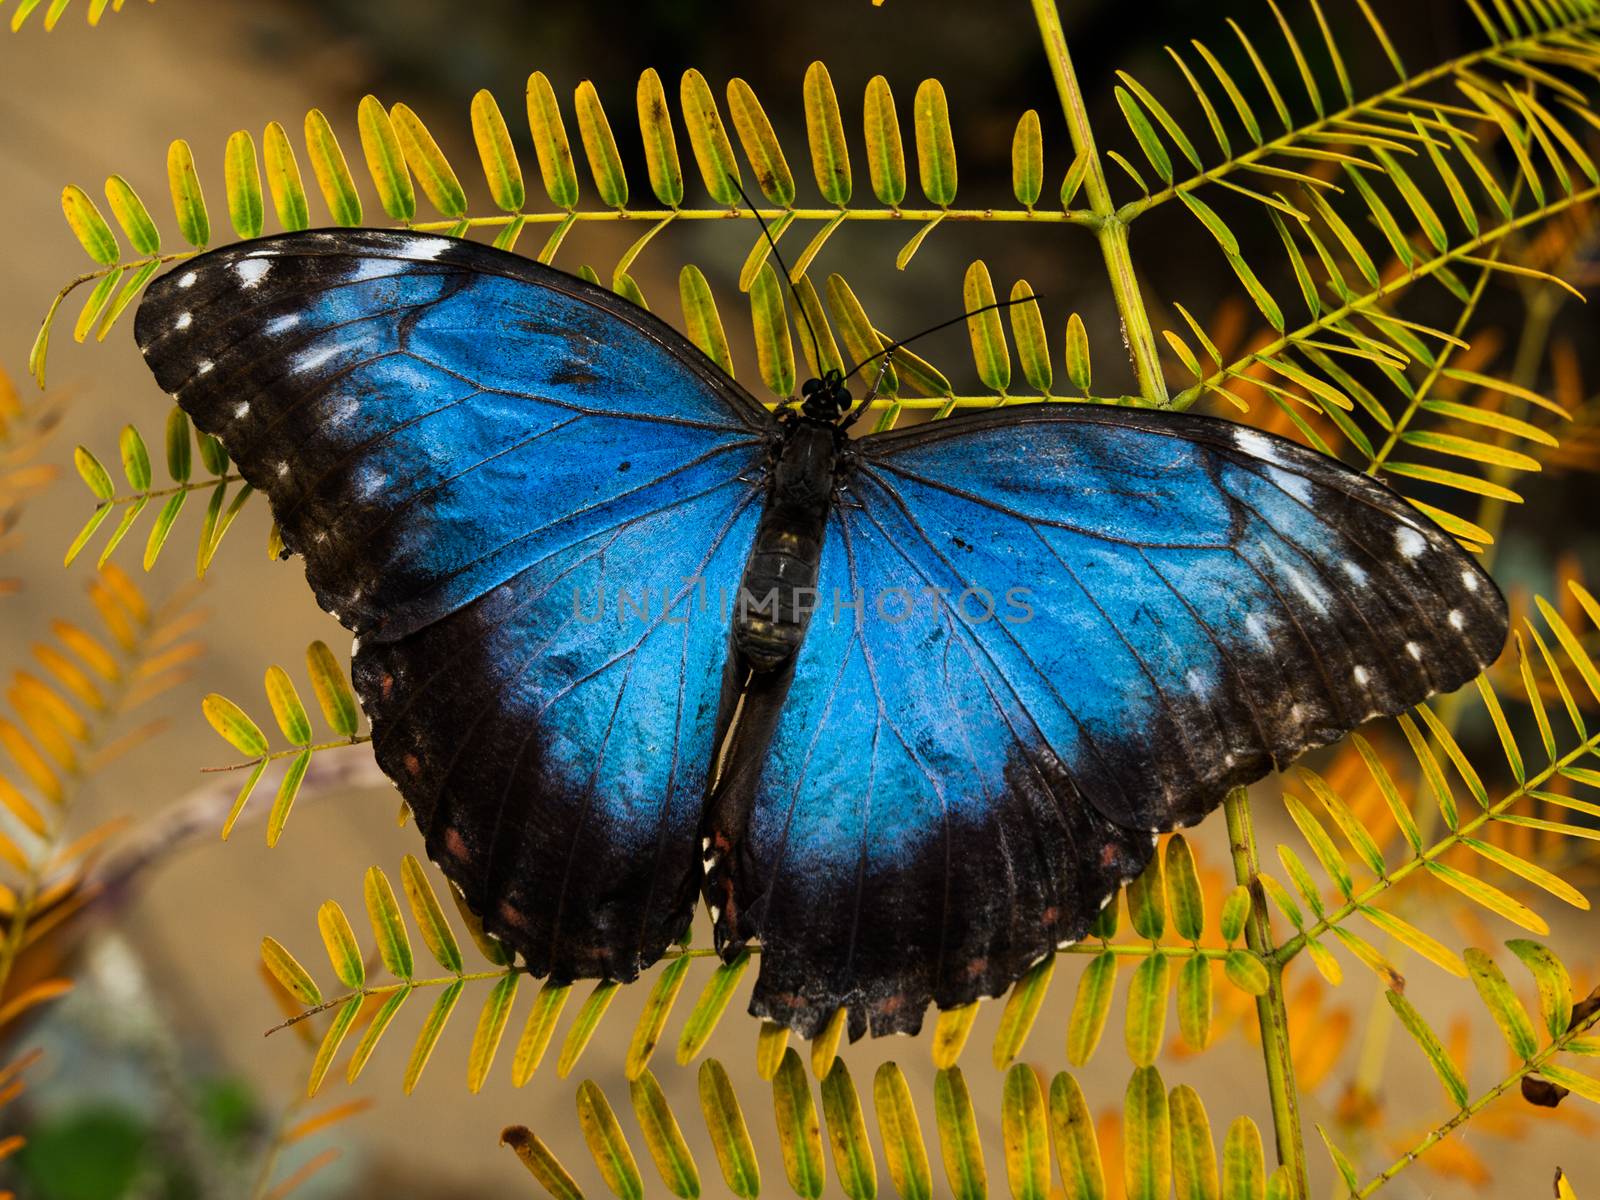 Morpho butterfly by pyty